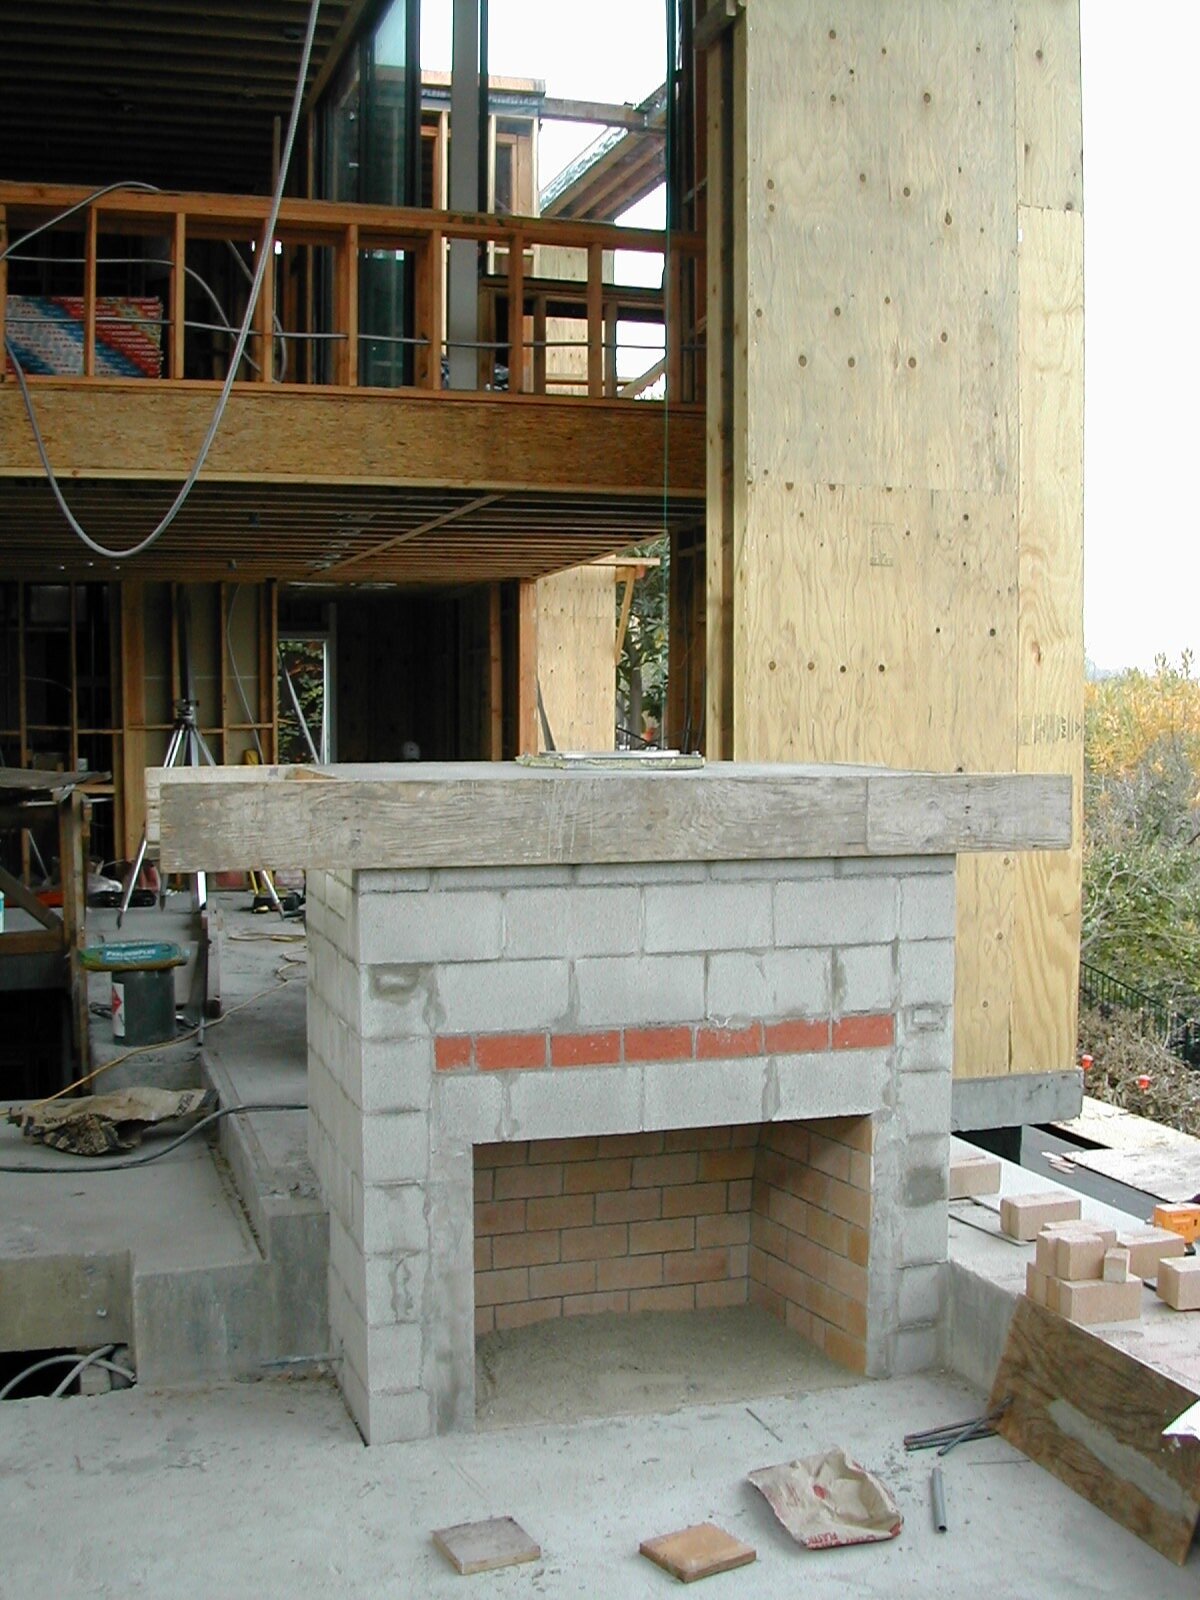  It seems difficult to compete with the simple economics of prefabricated fireplaces unless you have a memory of the real thing. In calculating the budget, we earmarked the funds for a brick and concrete fireplace, but as we progressed through founda